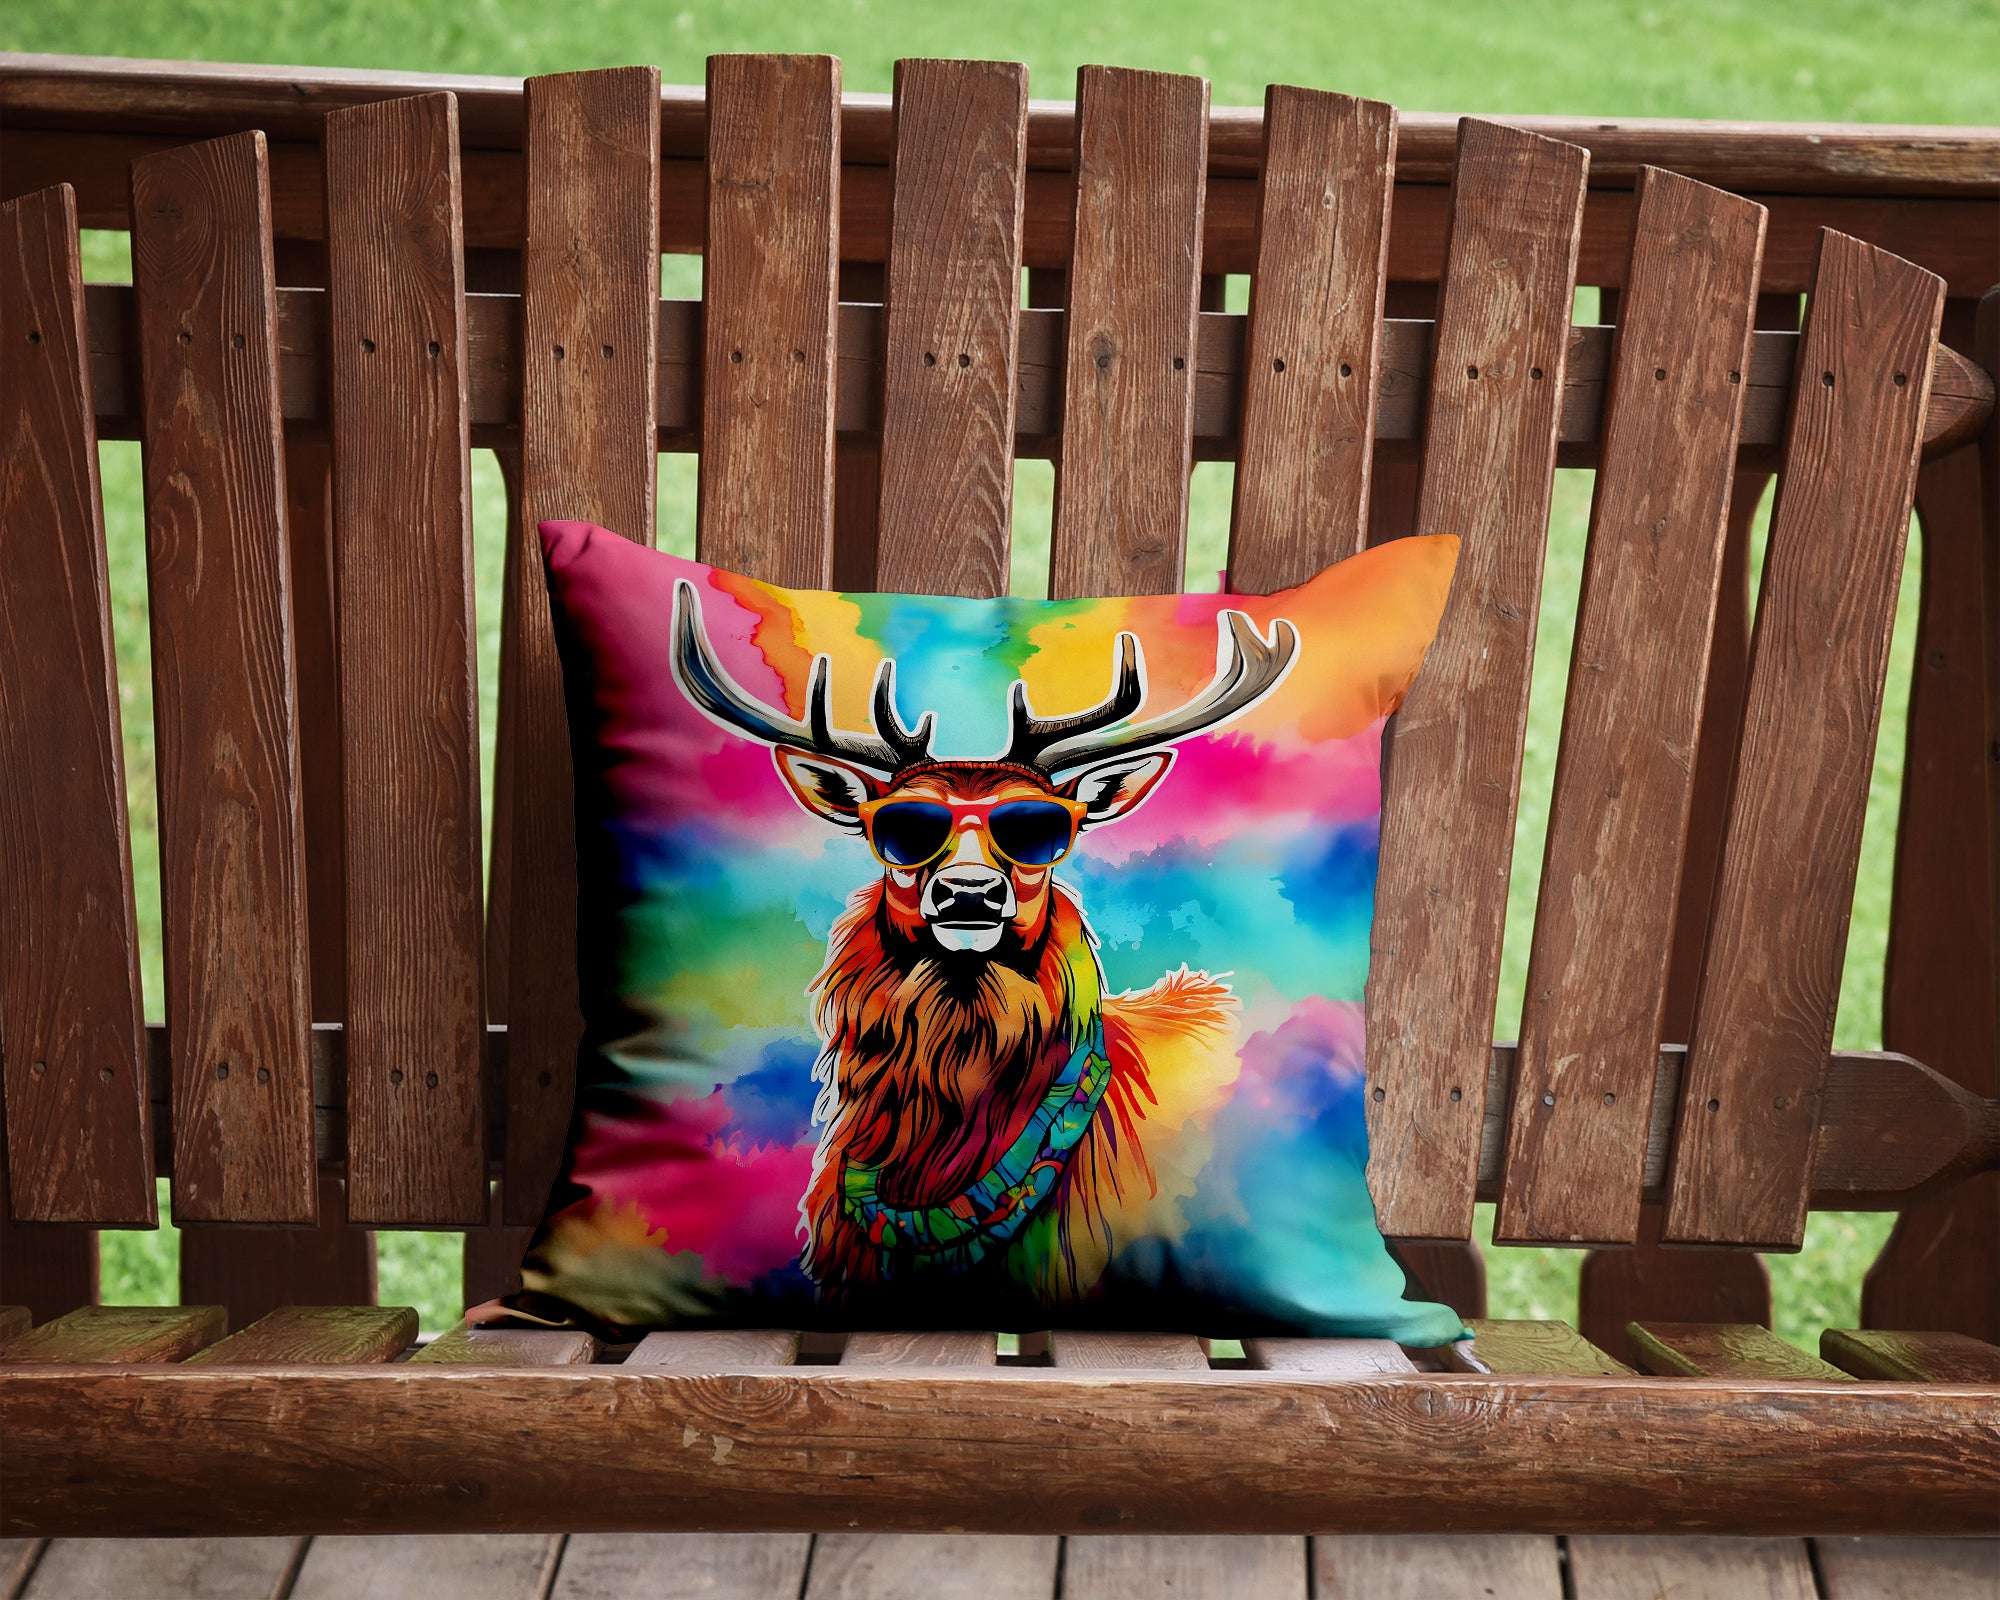 Buy this Hippie Animal Stag Deer Throw Pillow